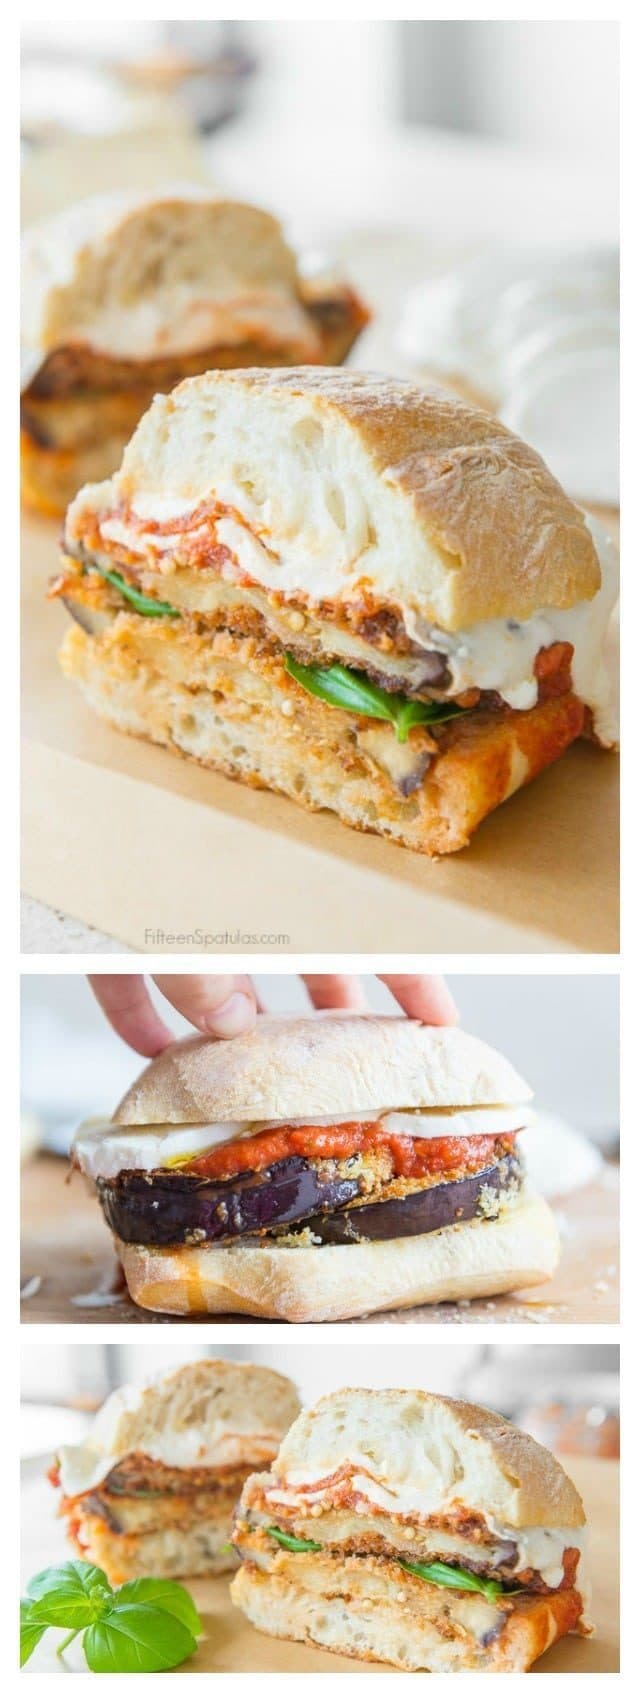 Photo Collage of Making Eggplant Parmesan Sandwiches